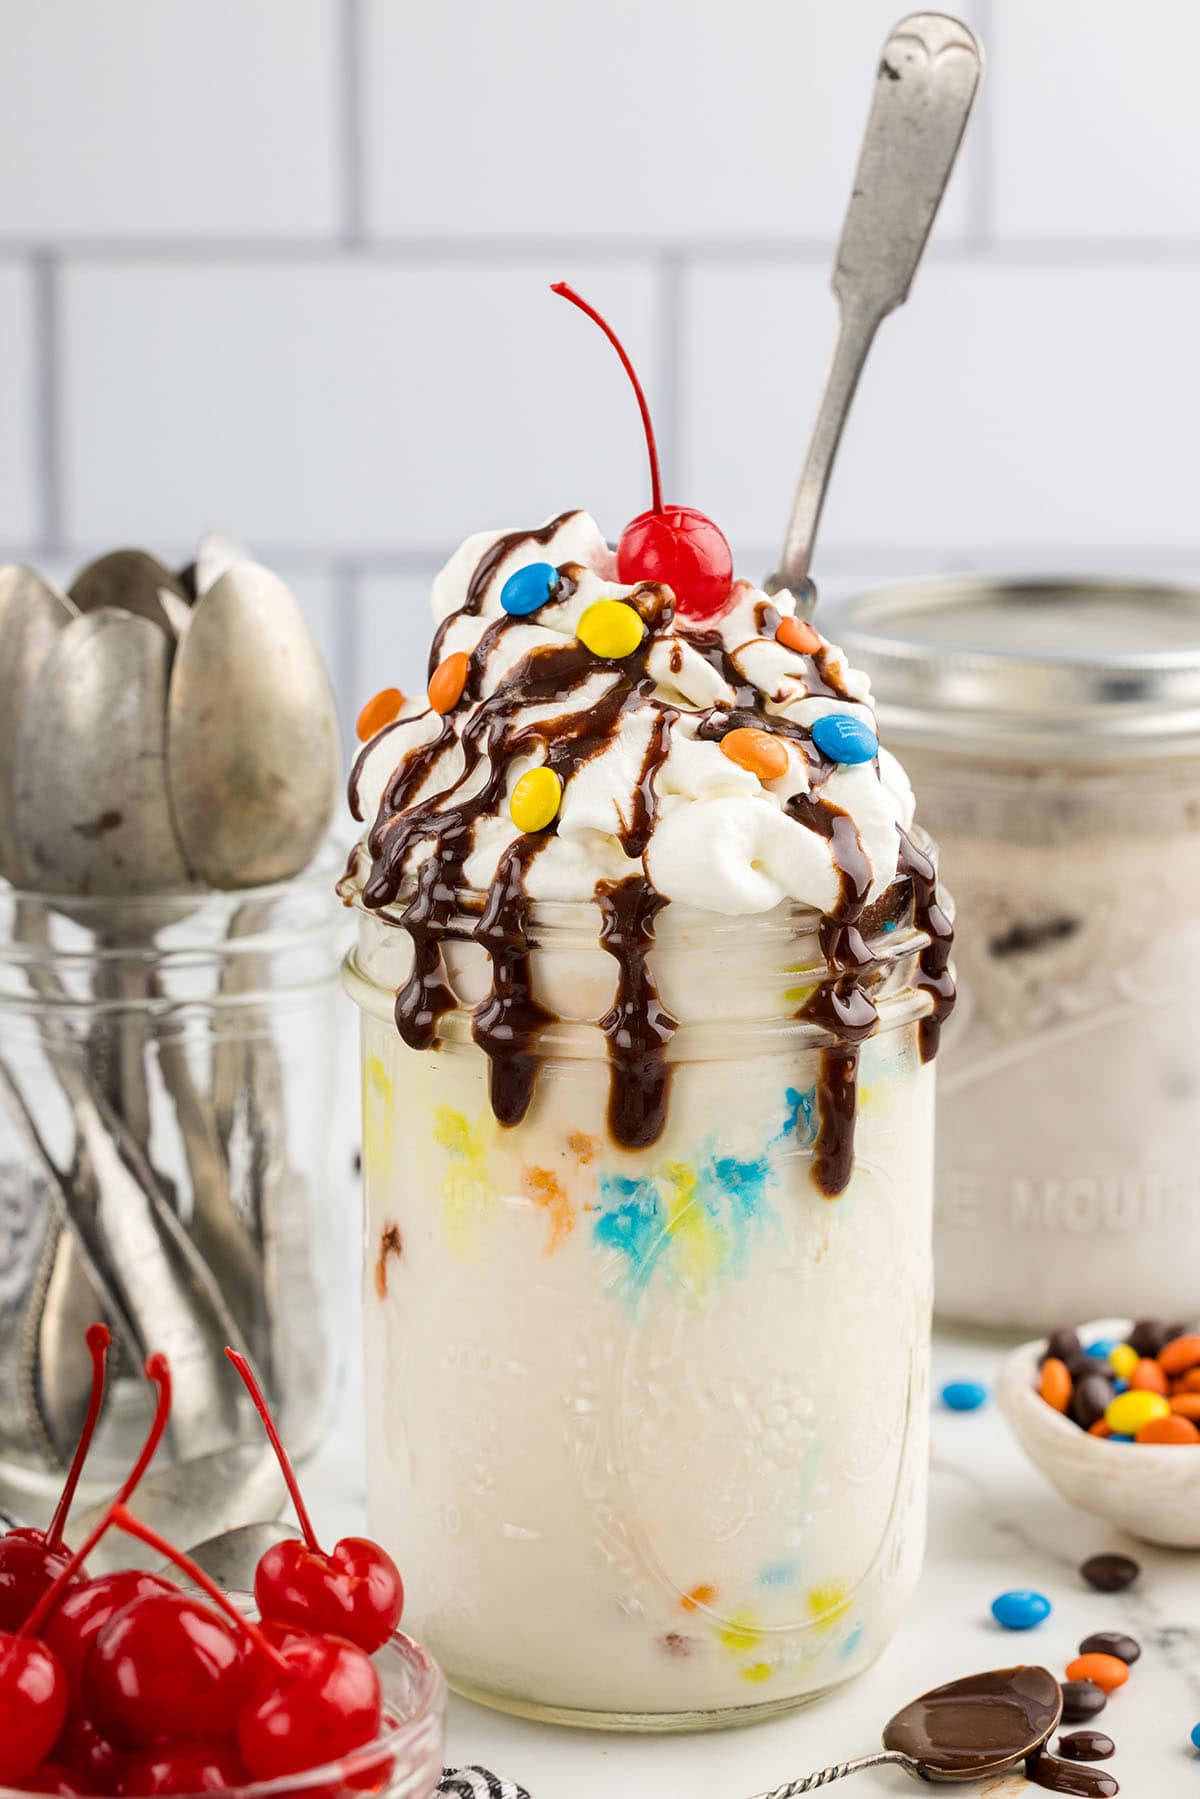 Mason Jar Ice Cream topped with M&M's, chocolate syrup and cherry.